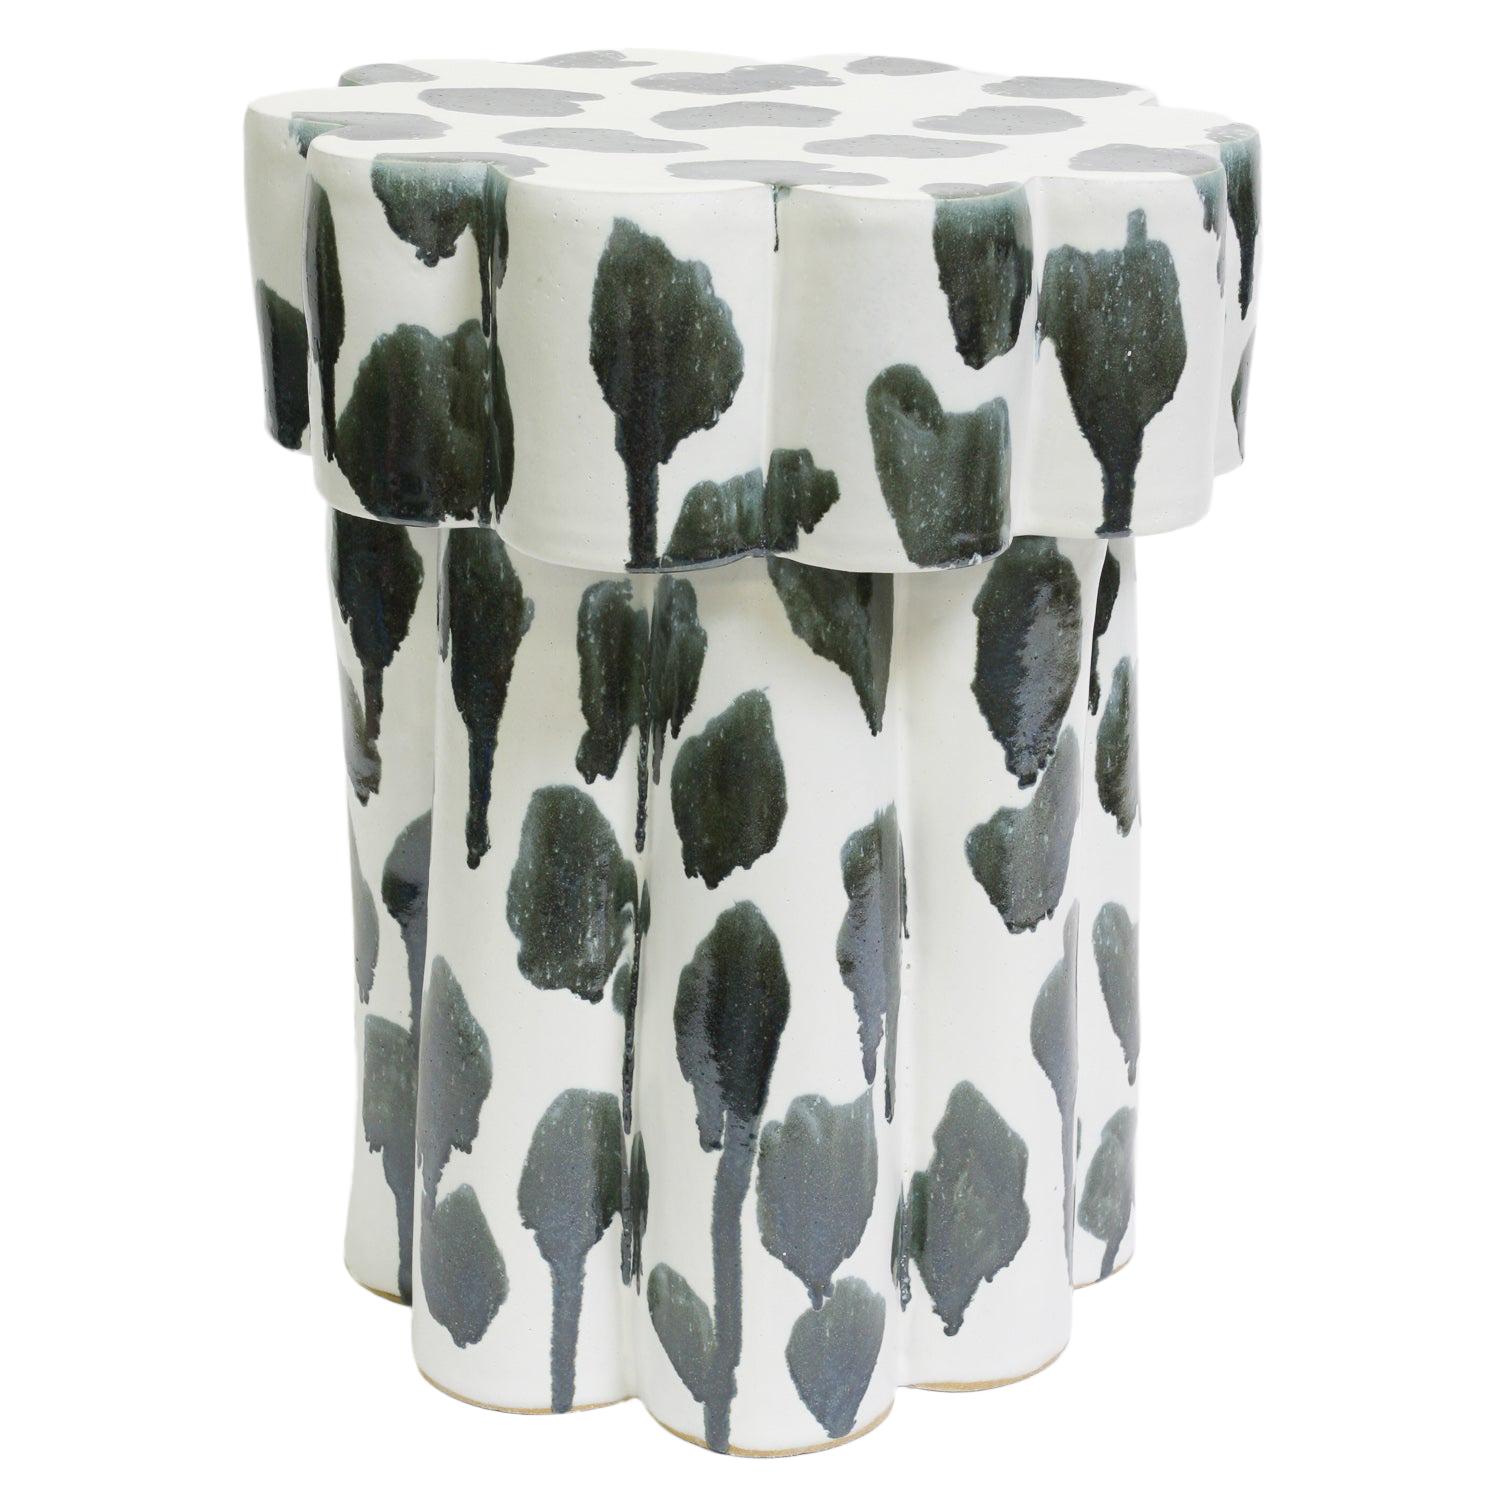 Two-Tier Ceramic Cloud Side Table & Stool in Drippy Palladium by BZIPPY For Sale